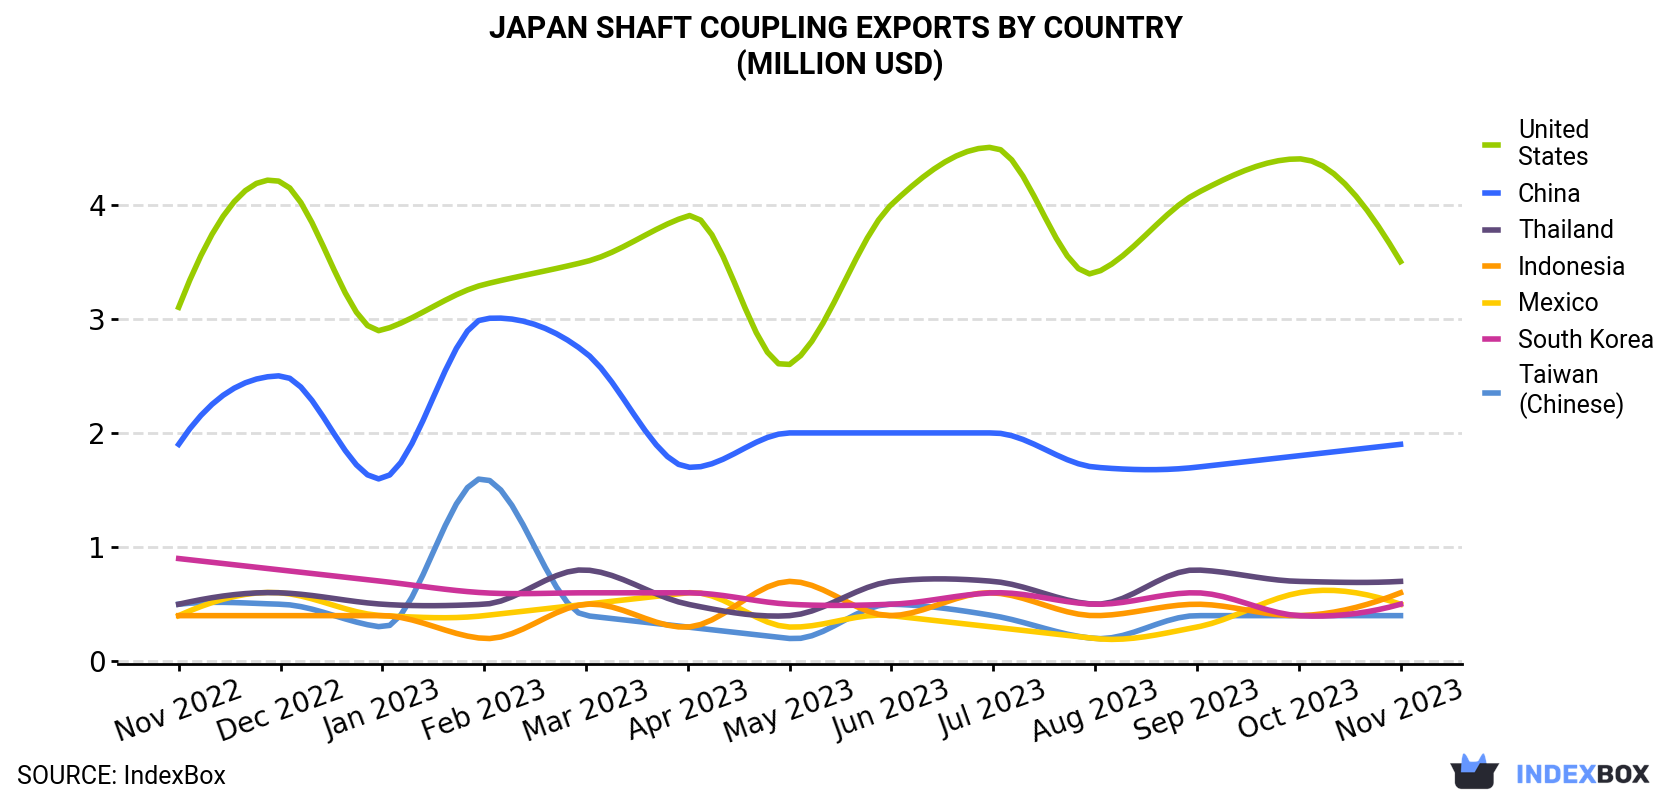 Japan Shaft Coupling Exports By Country (Million USD)